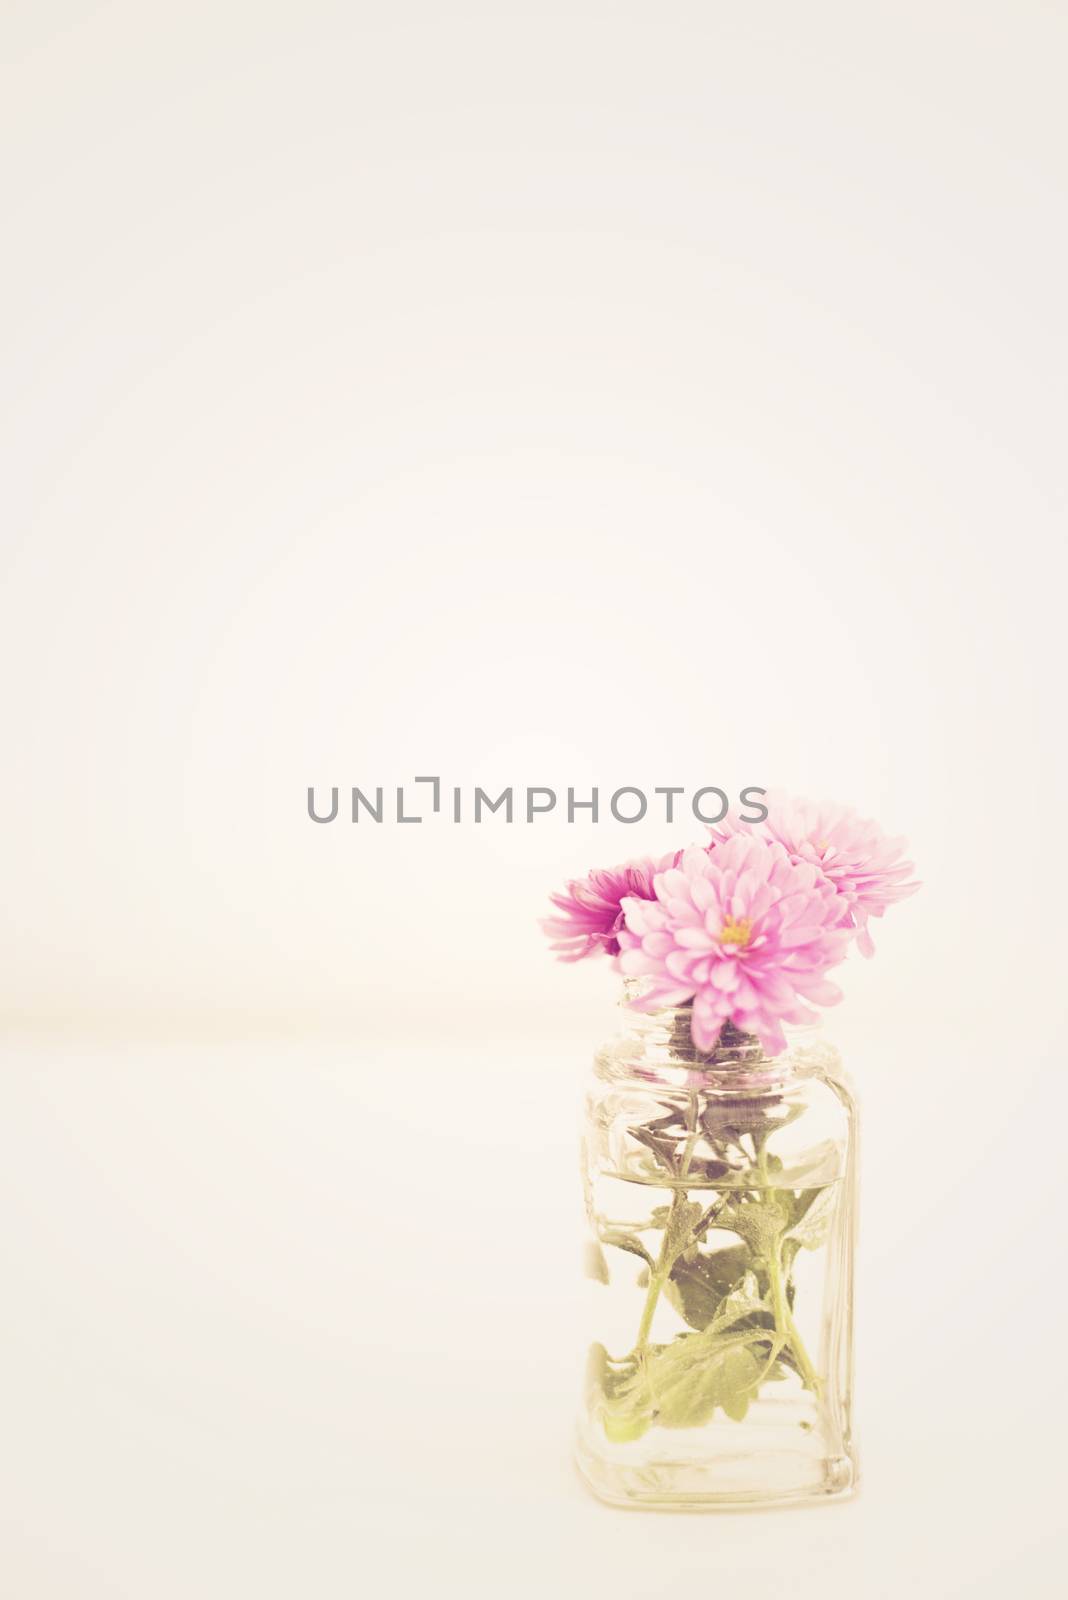 Bright picture of a purple chrysanthemum branch in a glass vase on a white background. Shades of white, teal, soft dreamy image. Selective focus. Vintage tinting